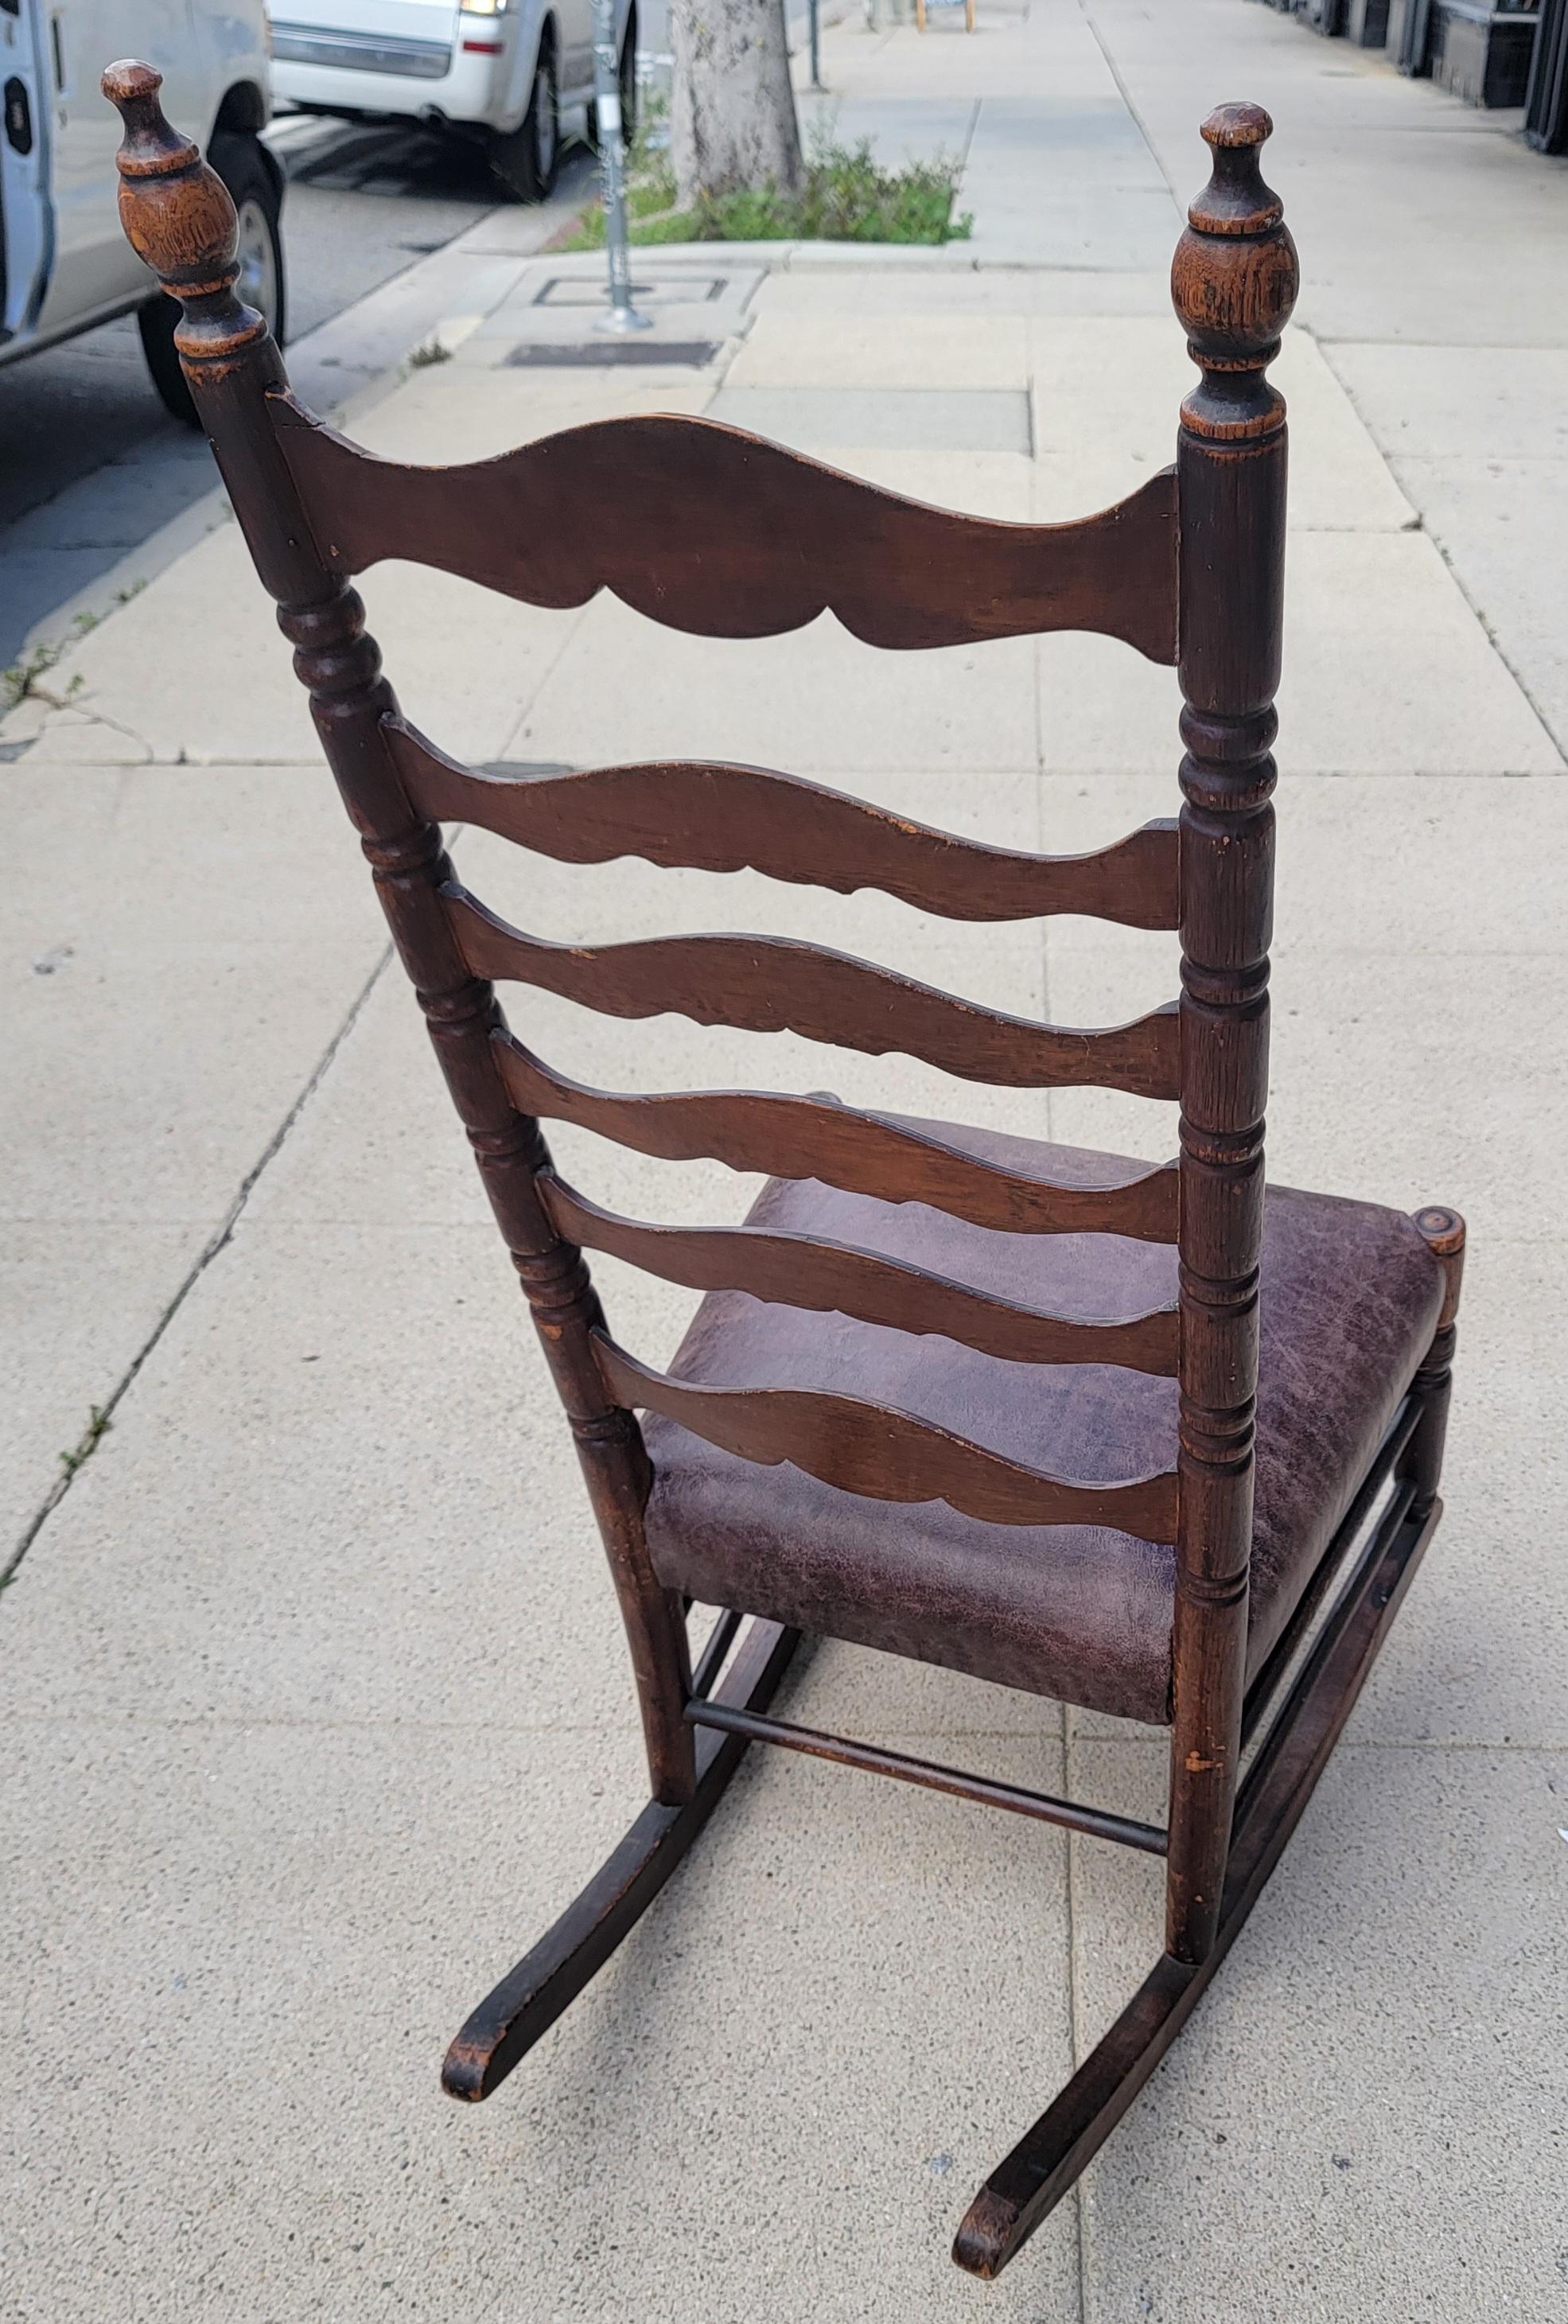 antique rocking chair leather seat